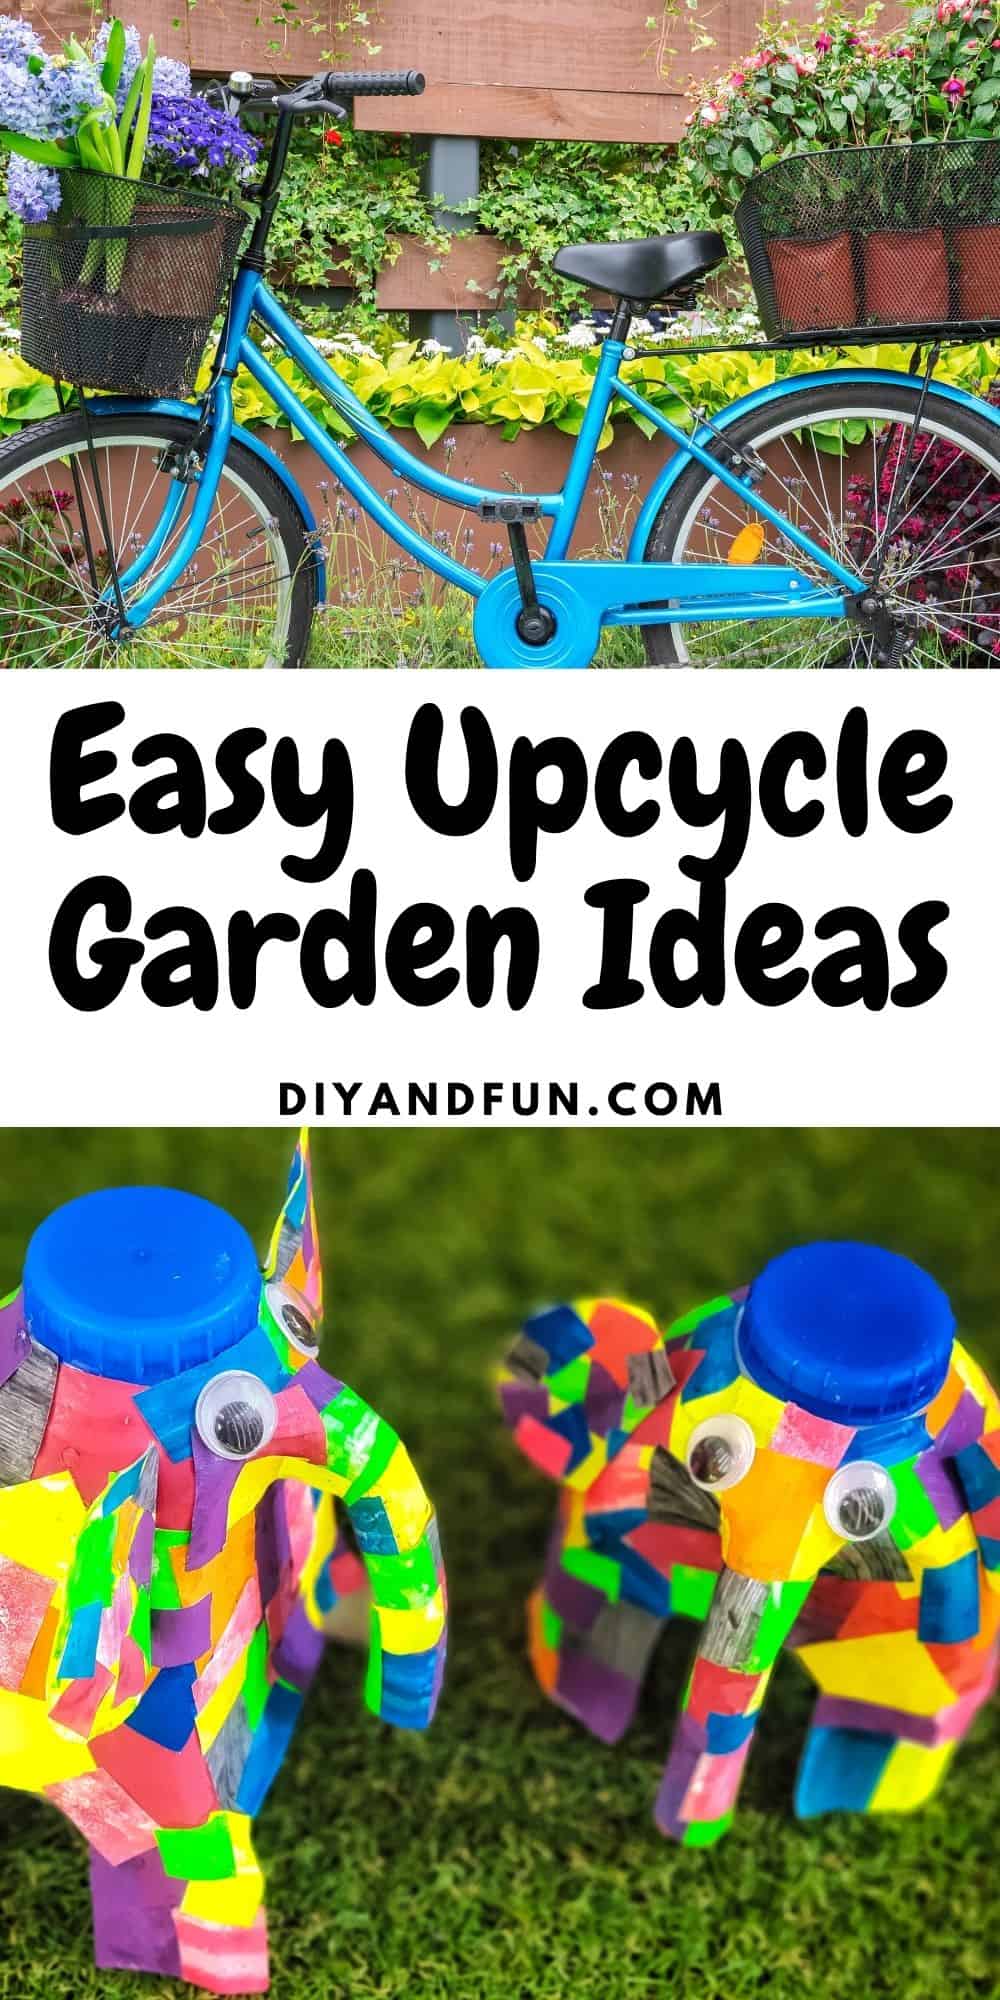 Easy DIY Upcycle Garden Ideas, inspirational ways to turn used, preloved, and common items into fun and beautiful yard décor.